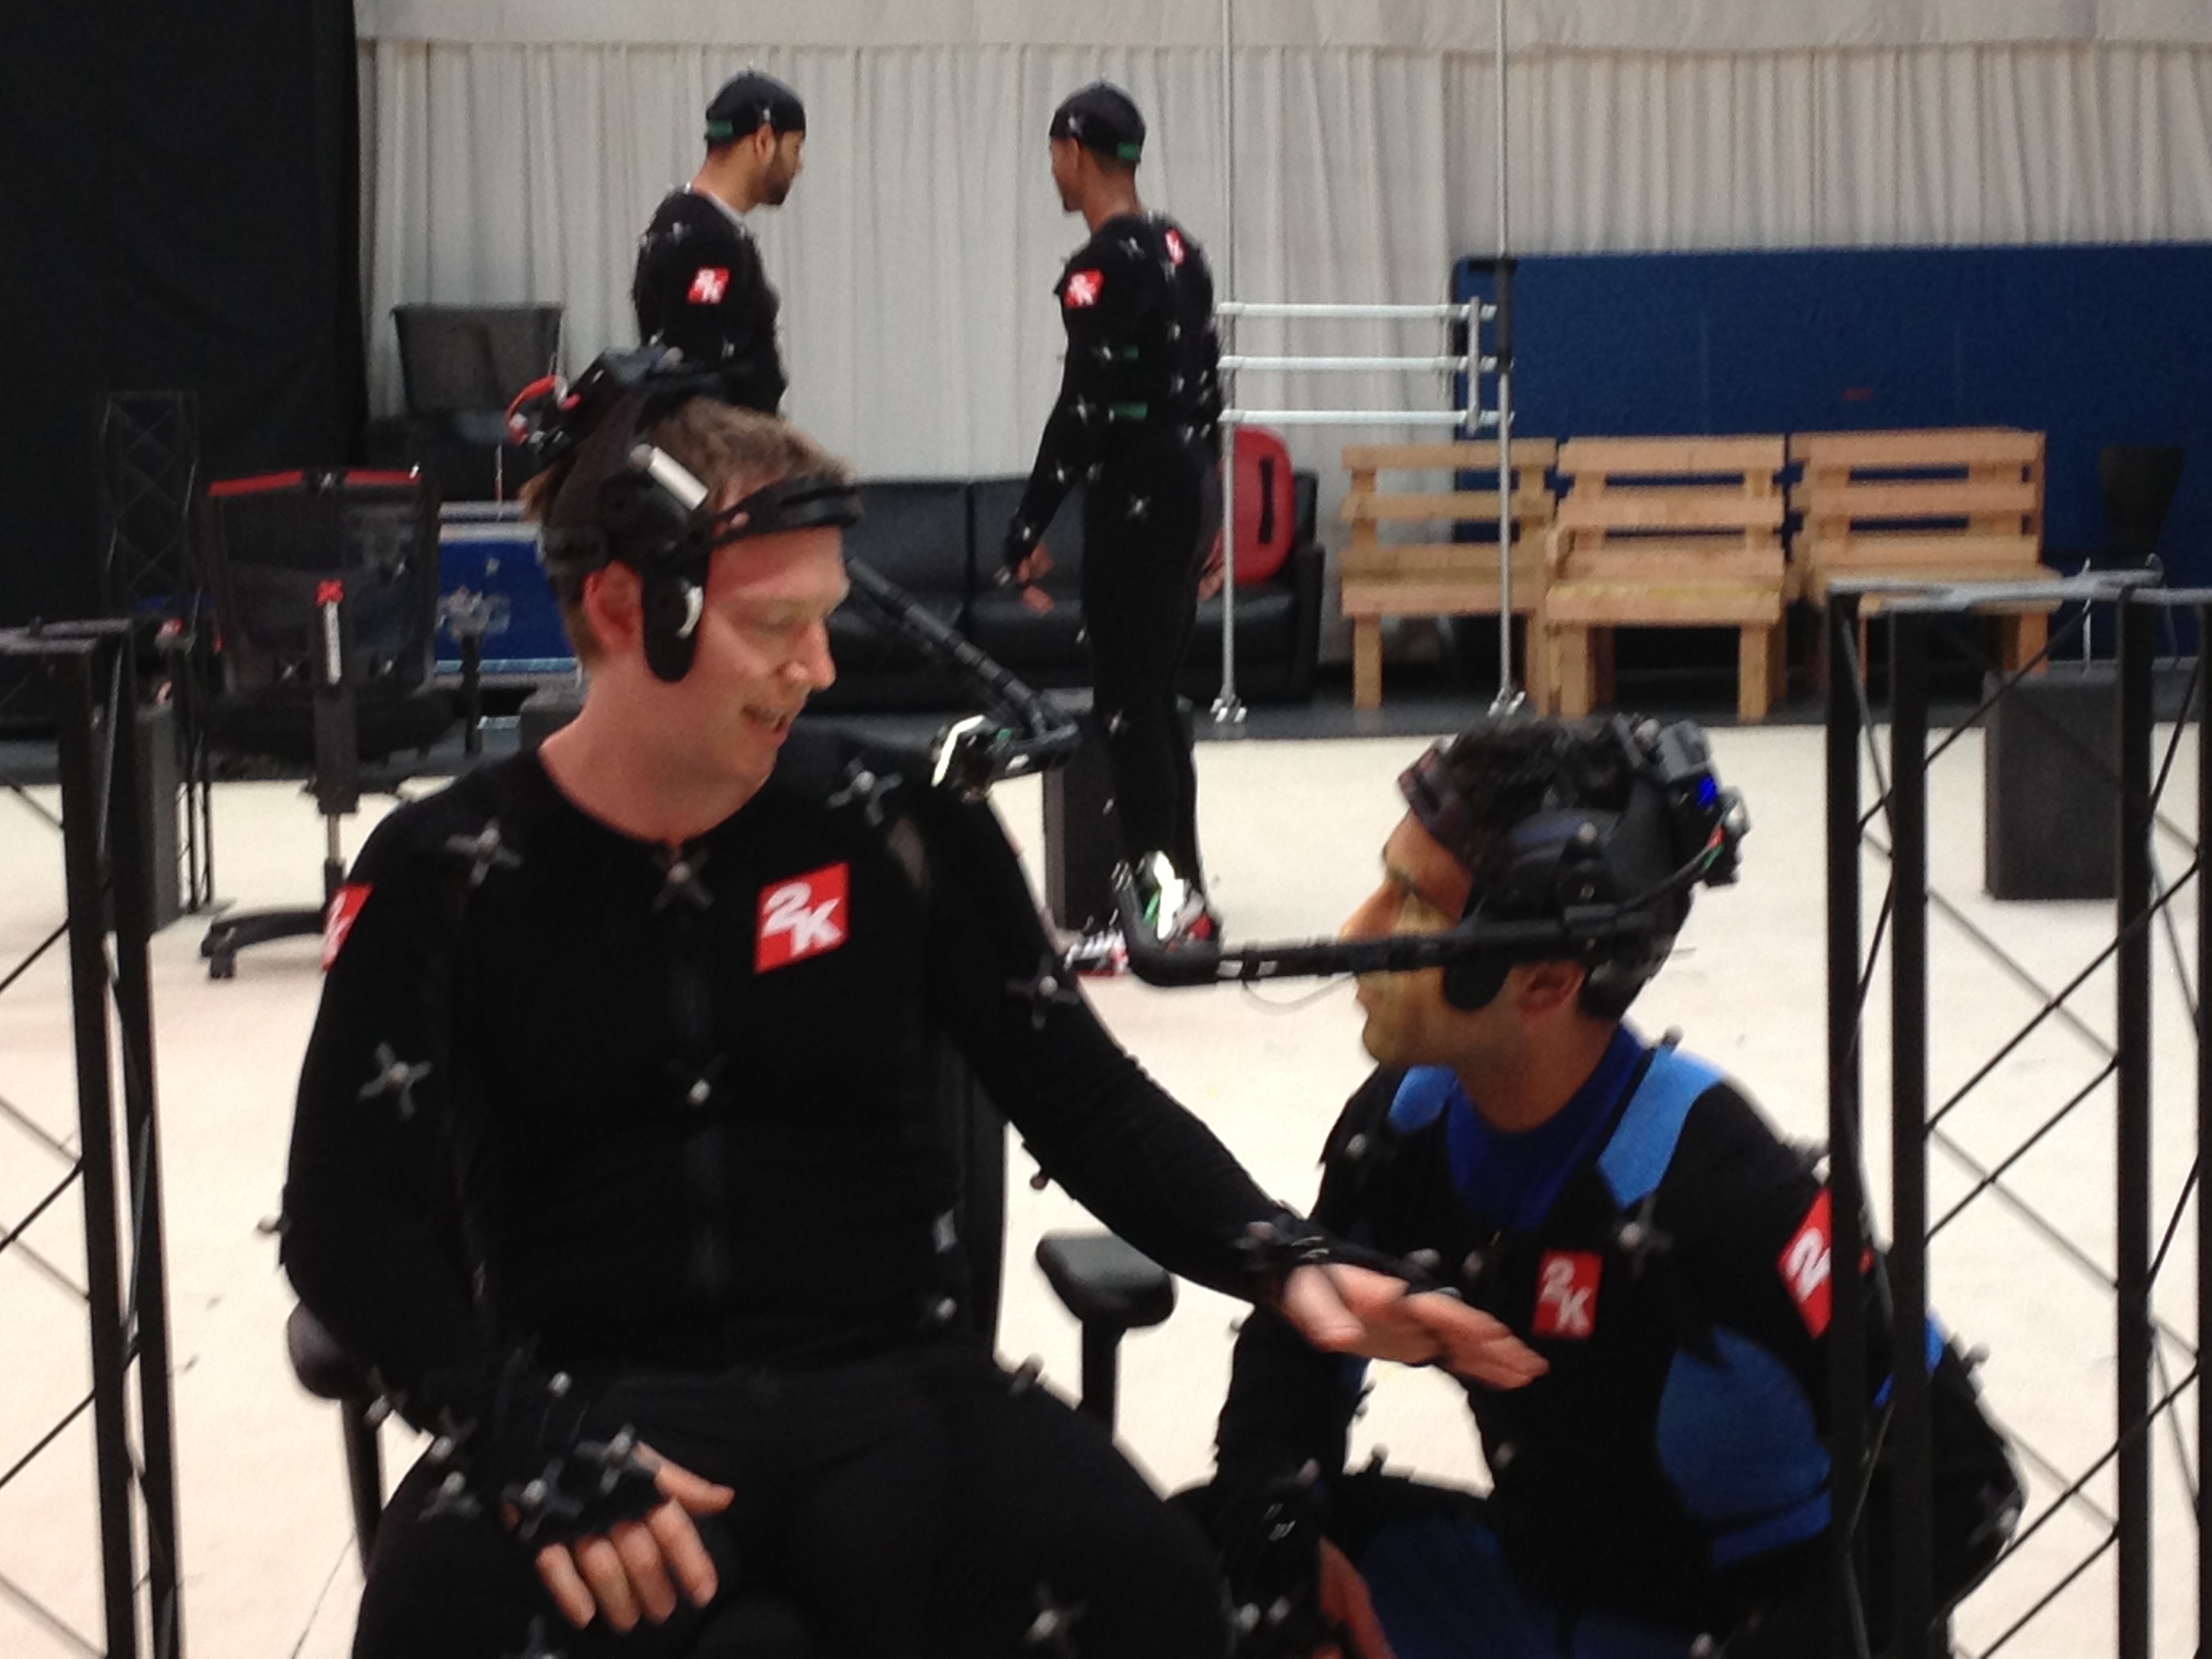 On set of NBA 2K14 at 2K games motion capture studio in Novato, CA. Pictured from Left to Right (foreground): Mark Middleton, David Ojakian.